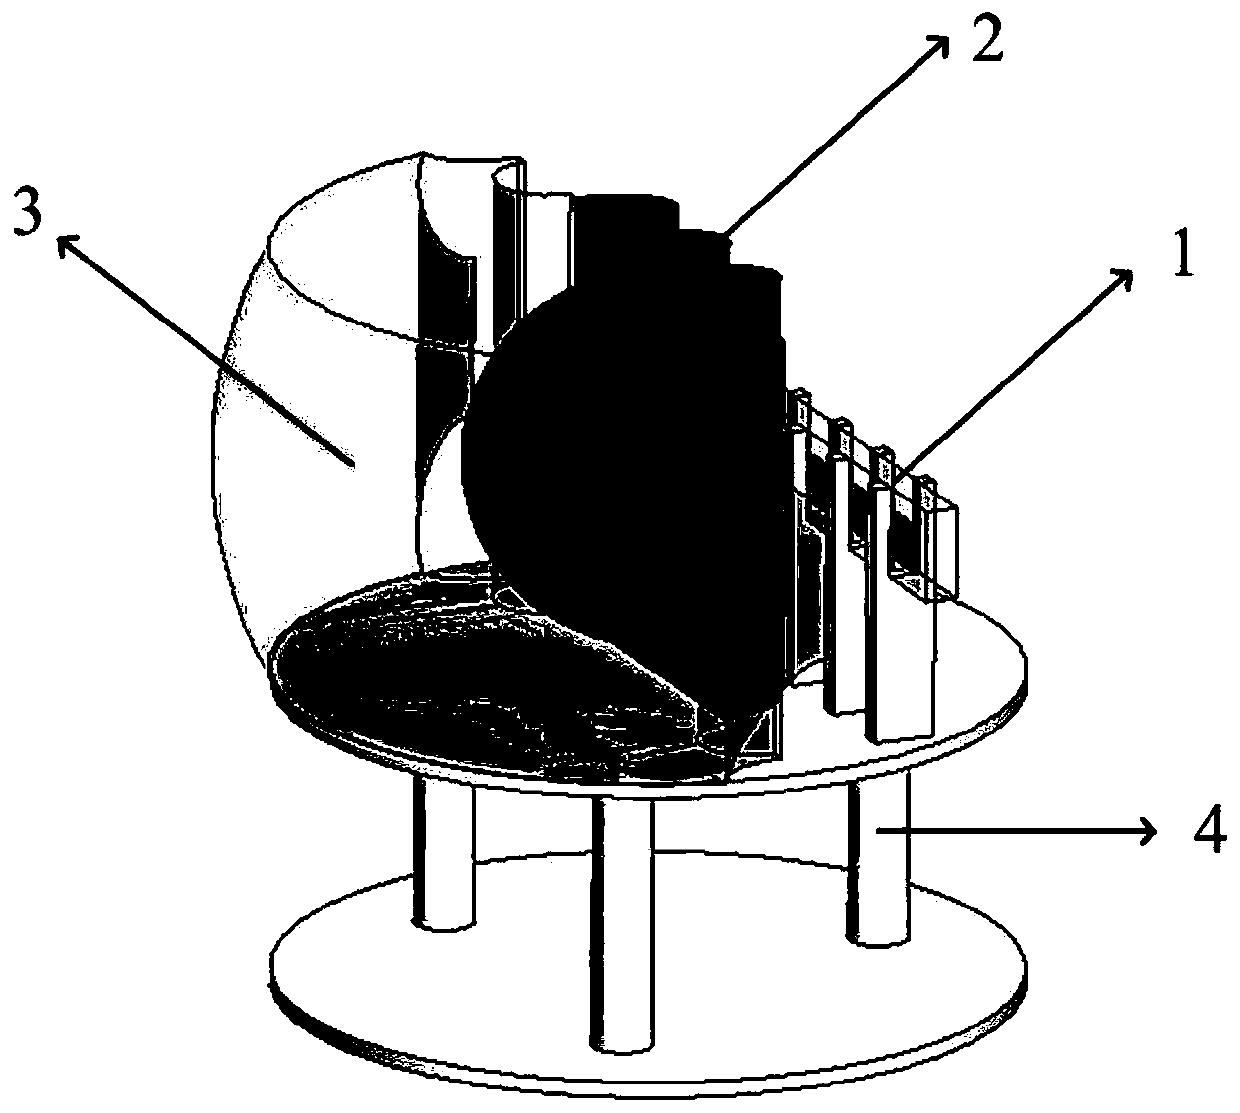 Wide-Angle Scanning Anamorphic Hemispherical Dielectric Lens Antenna Based on Array Feed